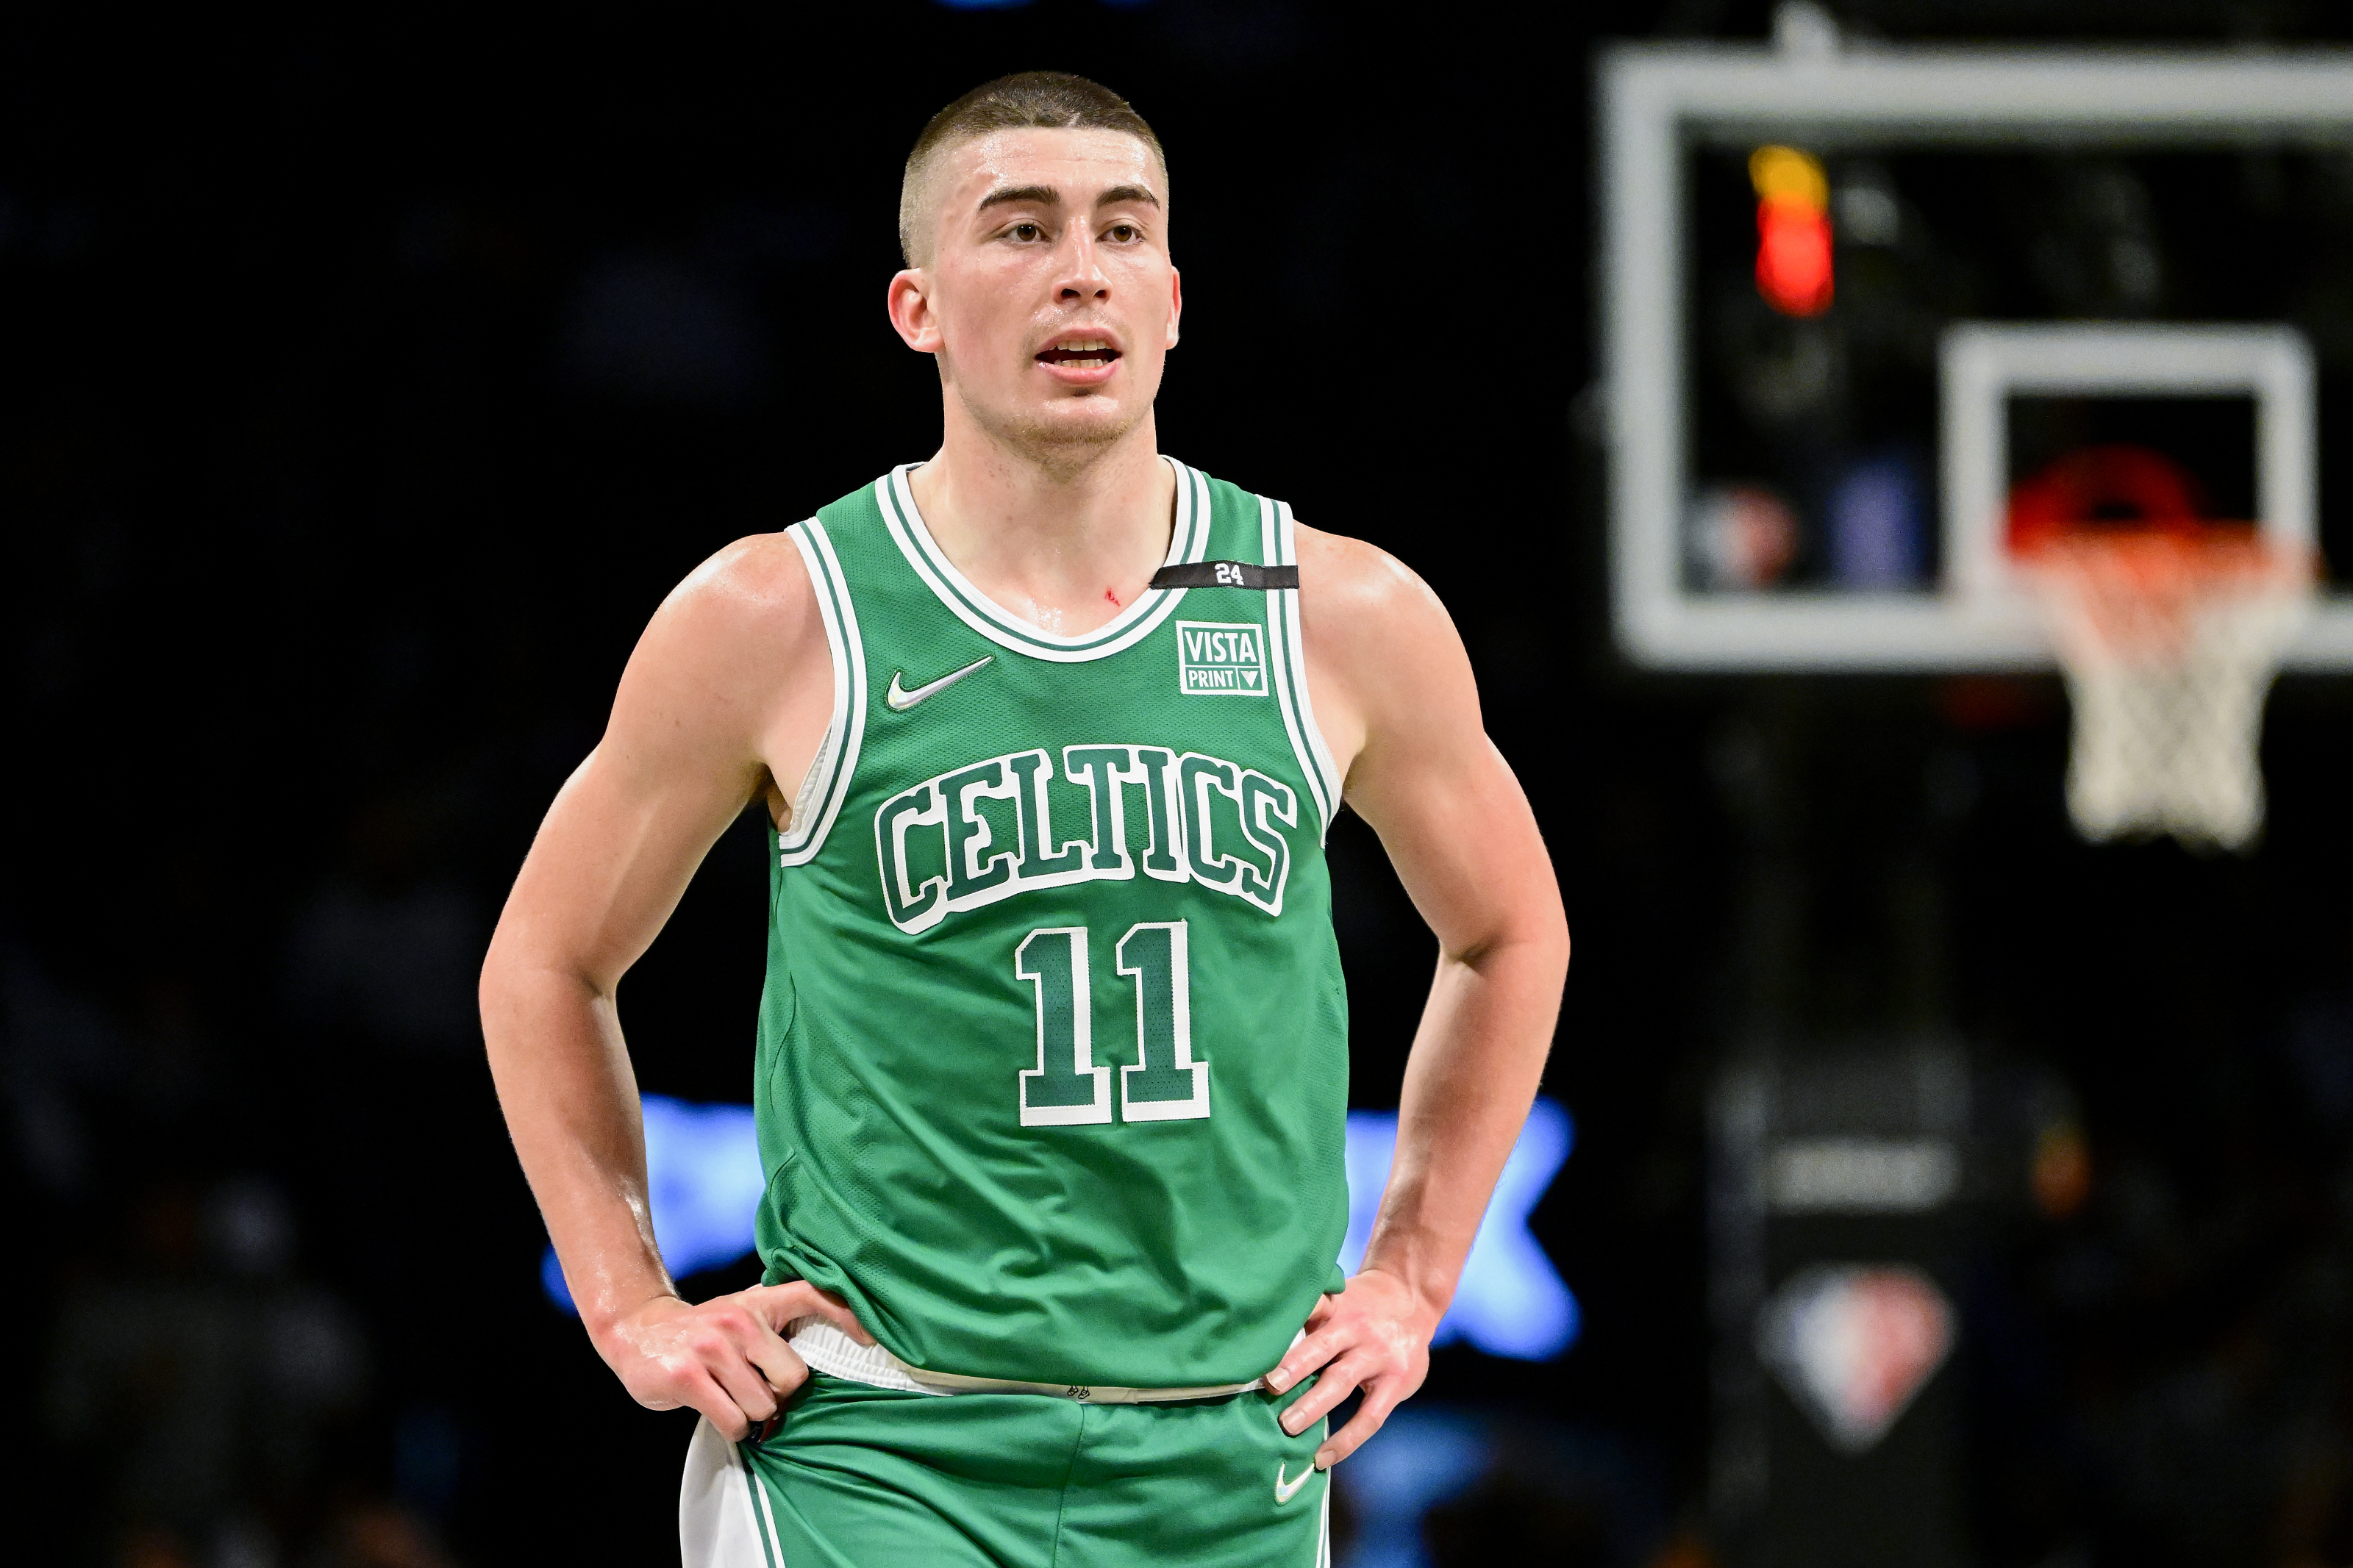 3 players who have uncertain futures with the Boston Celtics